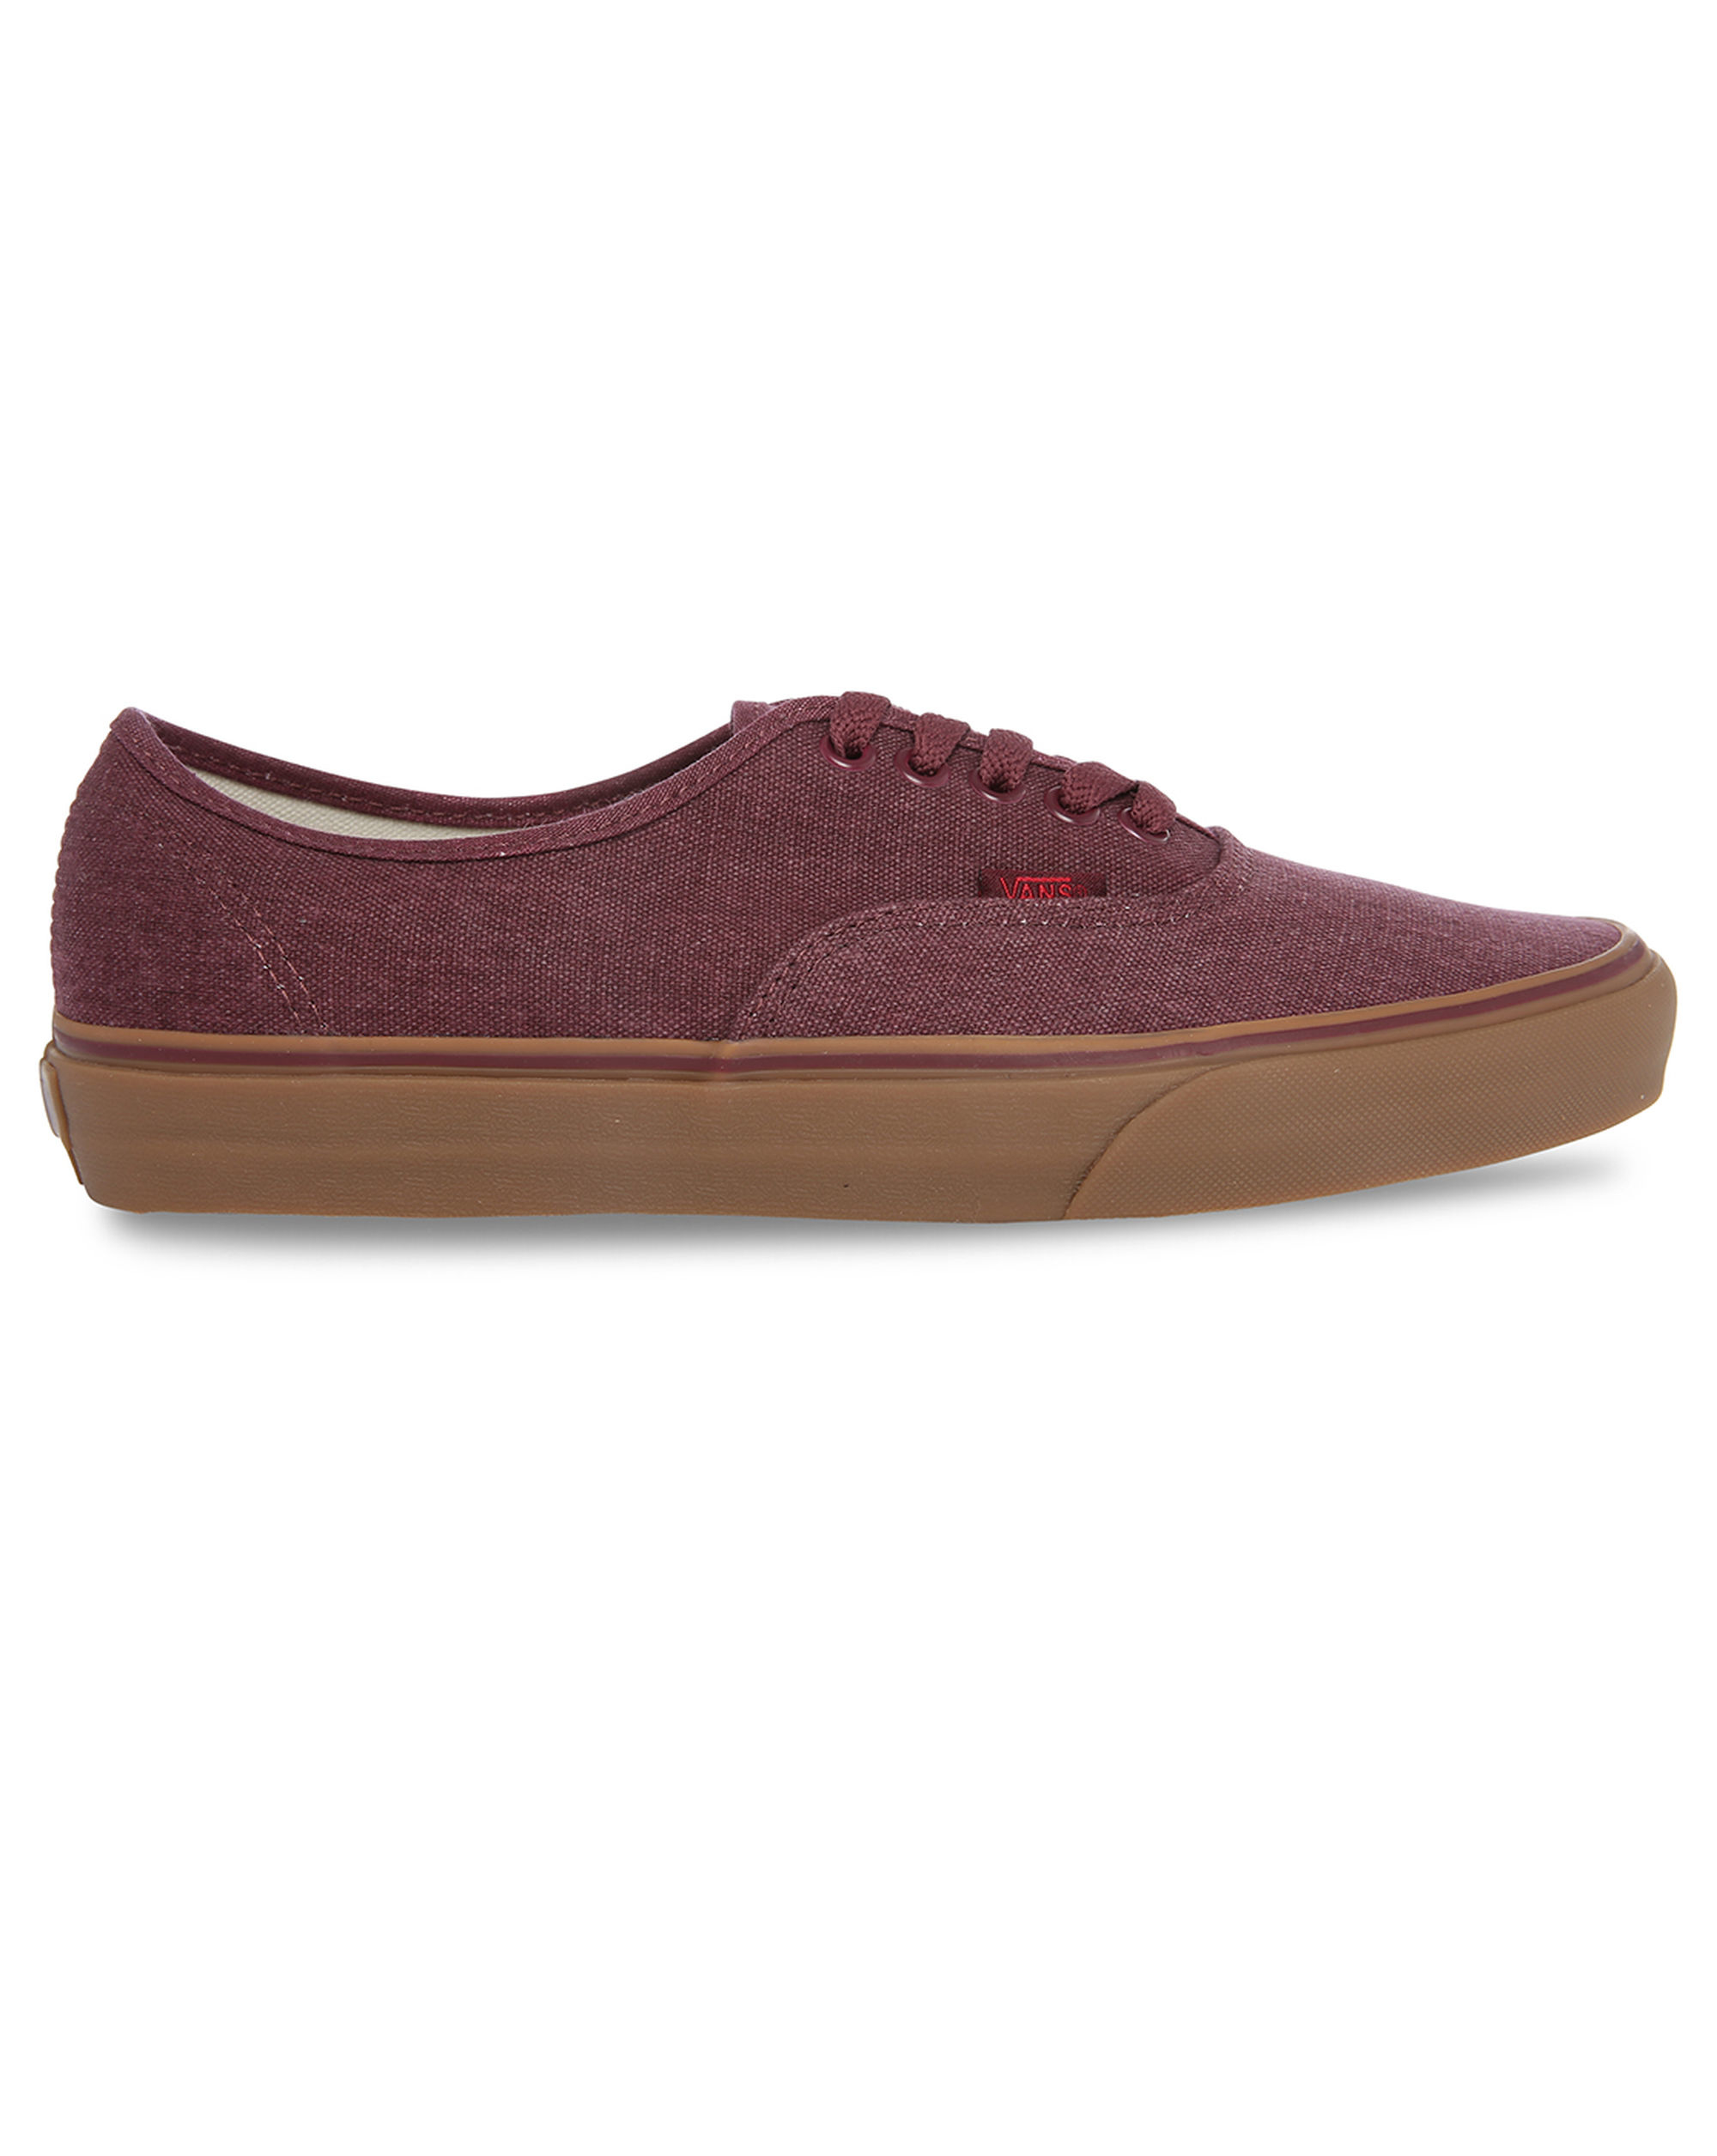 Vans Burgundy Authentic Washed Canvas Sneakers With Gum Sole in Purple ...